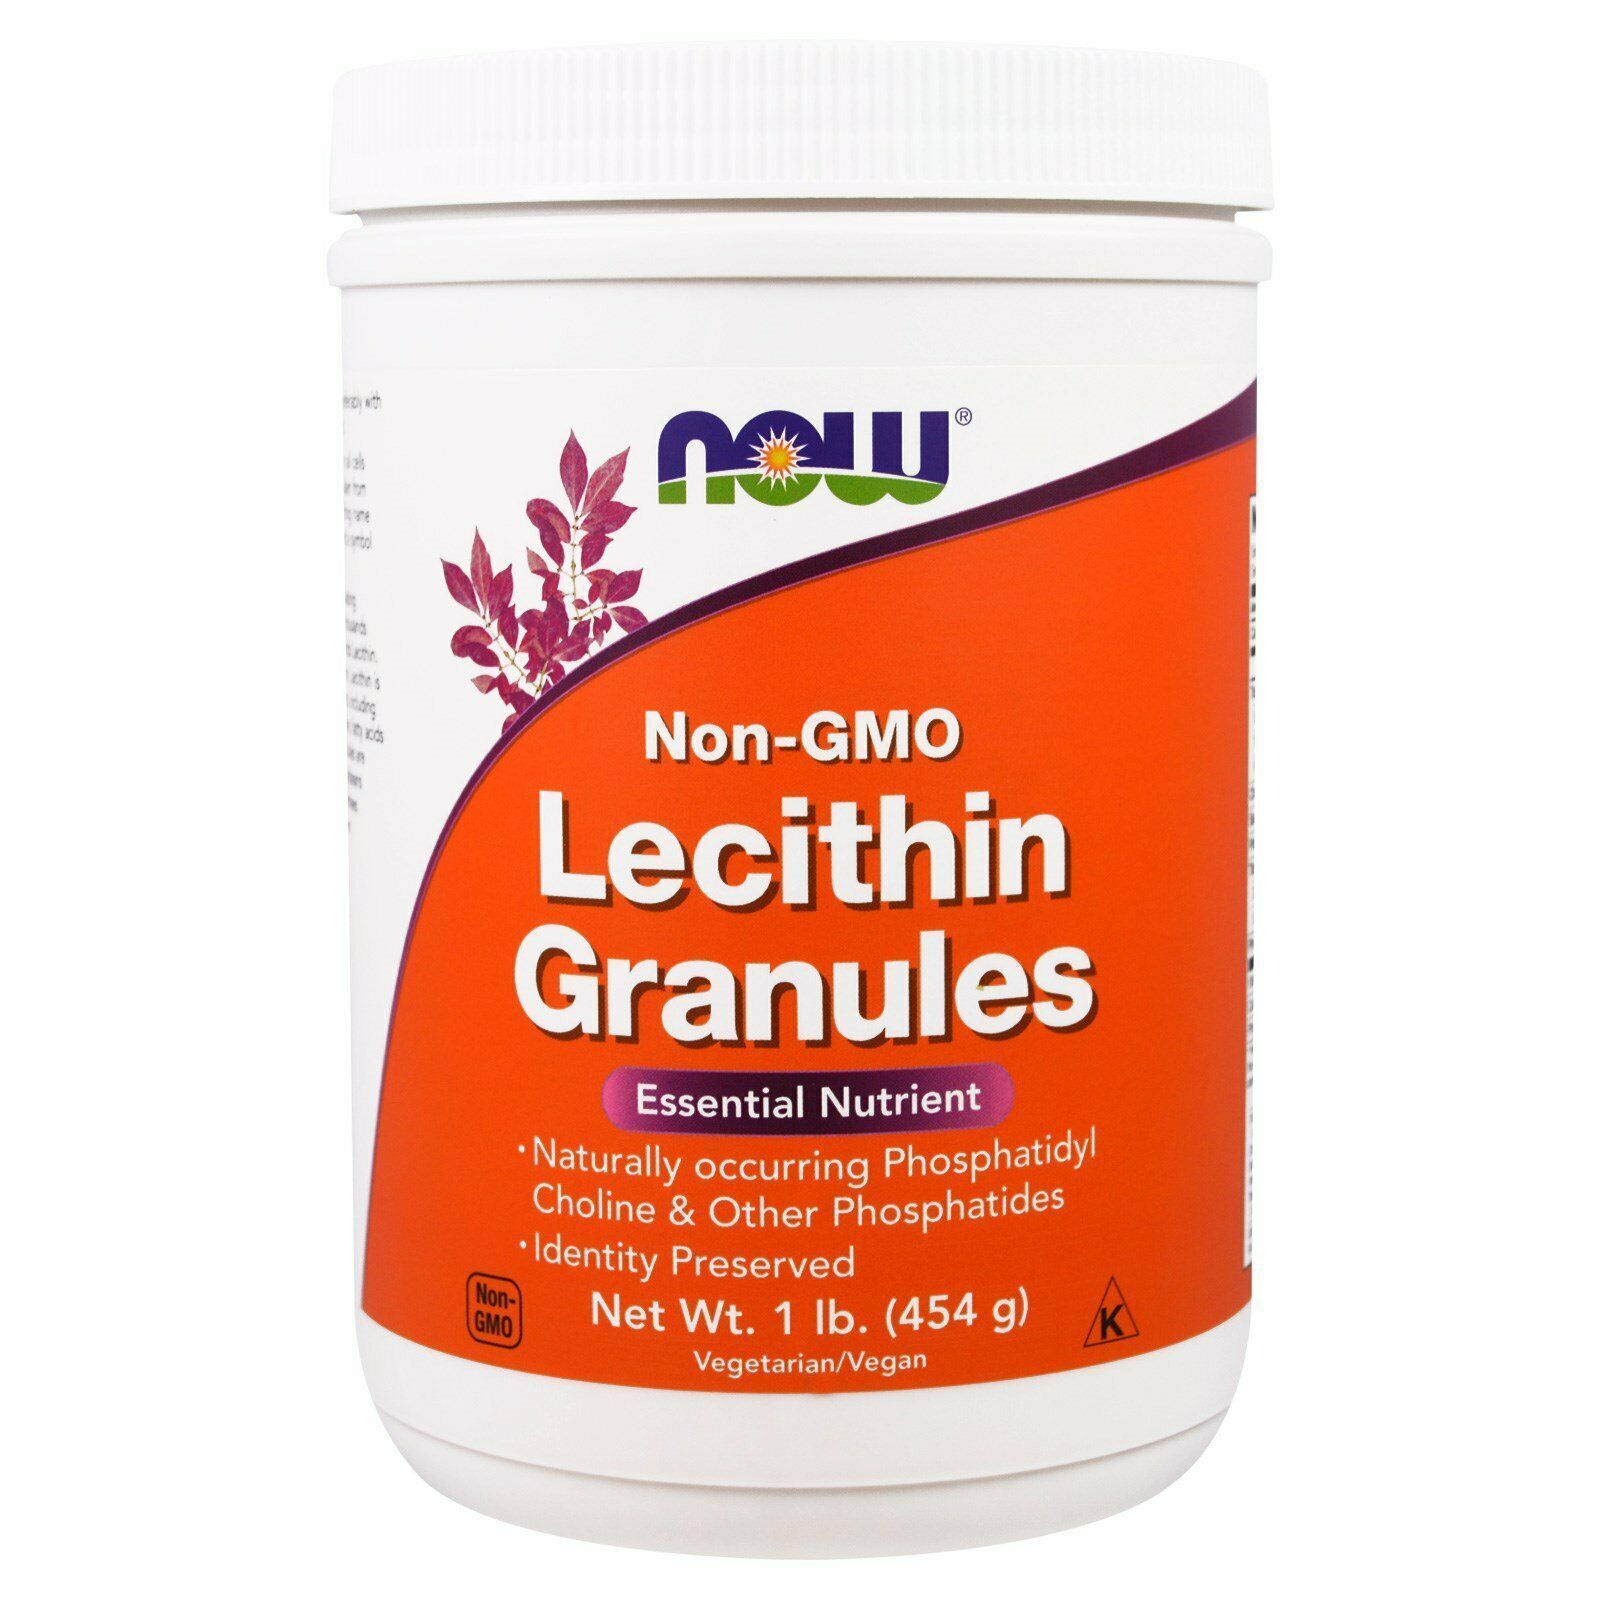 Primary image for Now Foods Lecithin Granules Non-GMO, 1 lb (454 g)